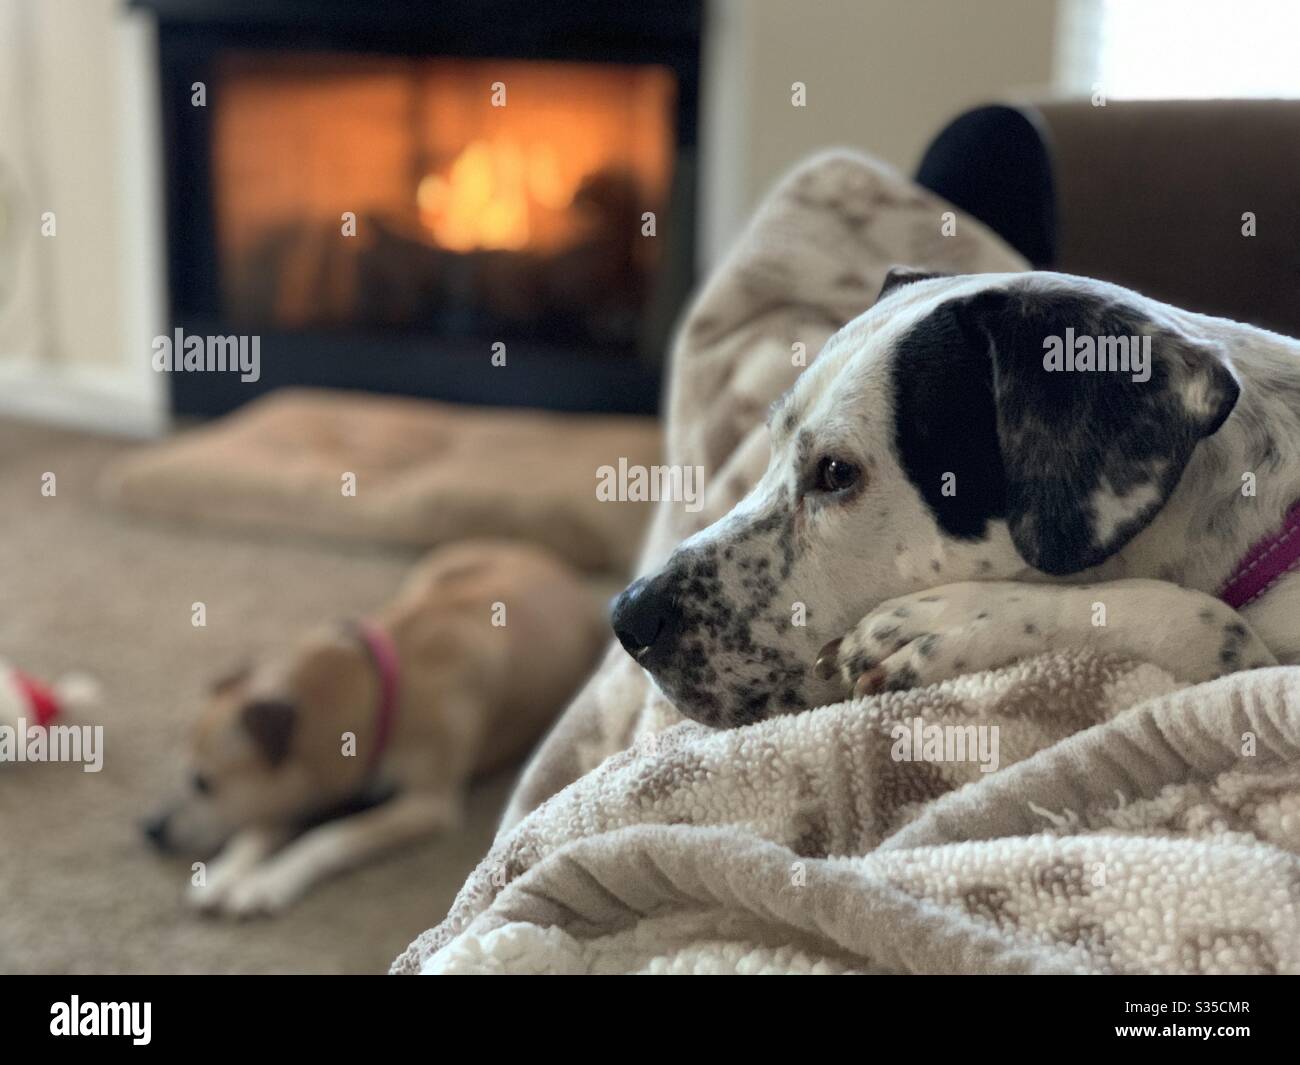 Dog sitting near a fireplace with another sitting on a couch nearby. Stock Photo